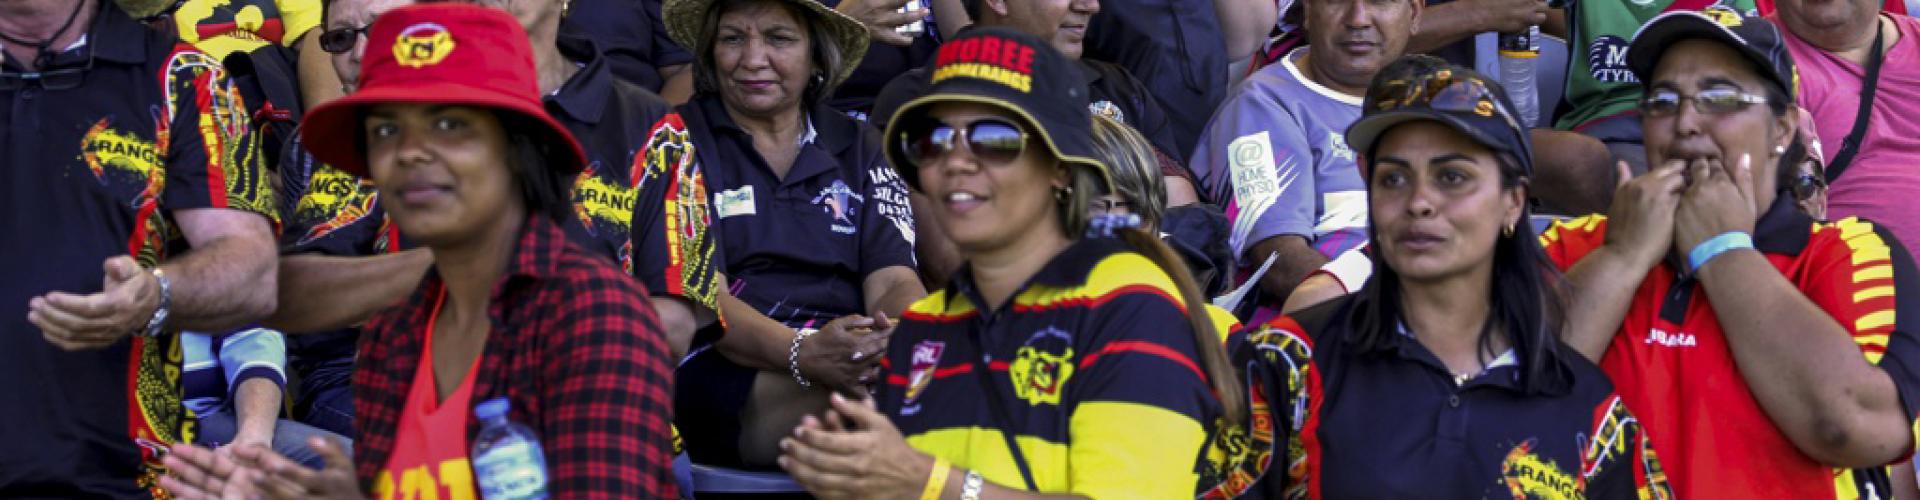 Koori Knockout supporters from Moree, Dubbo, NSW, 1 October 2015 by Barbara